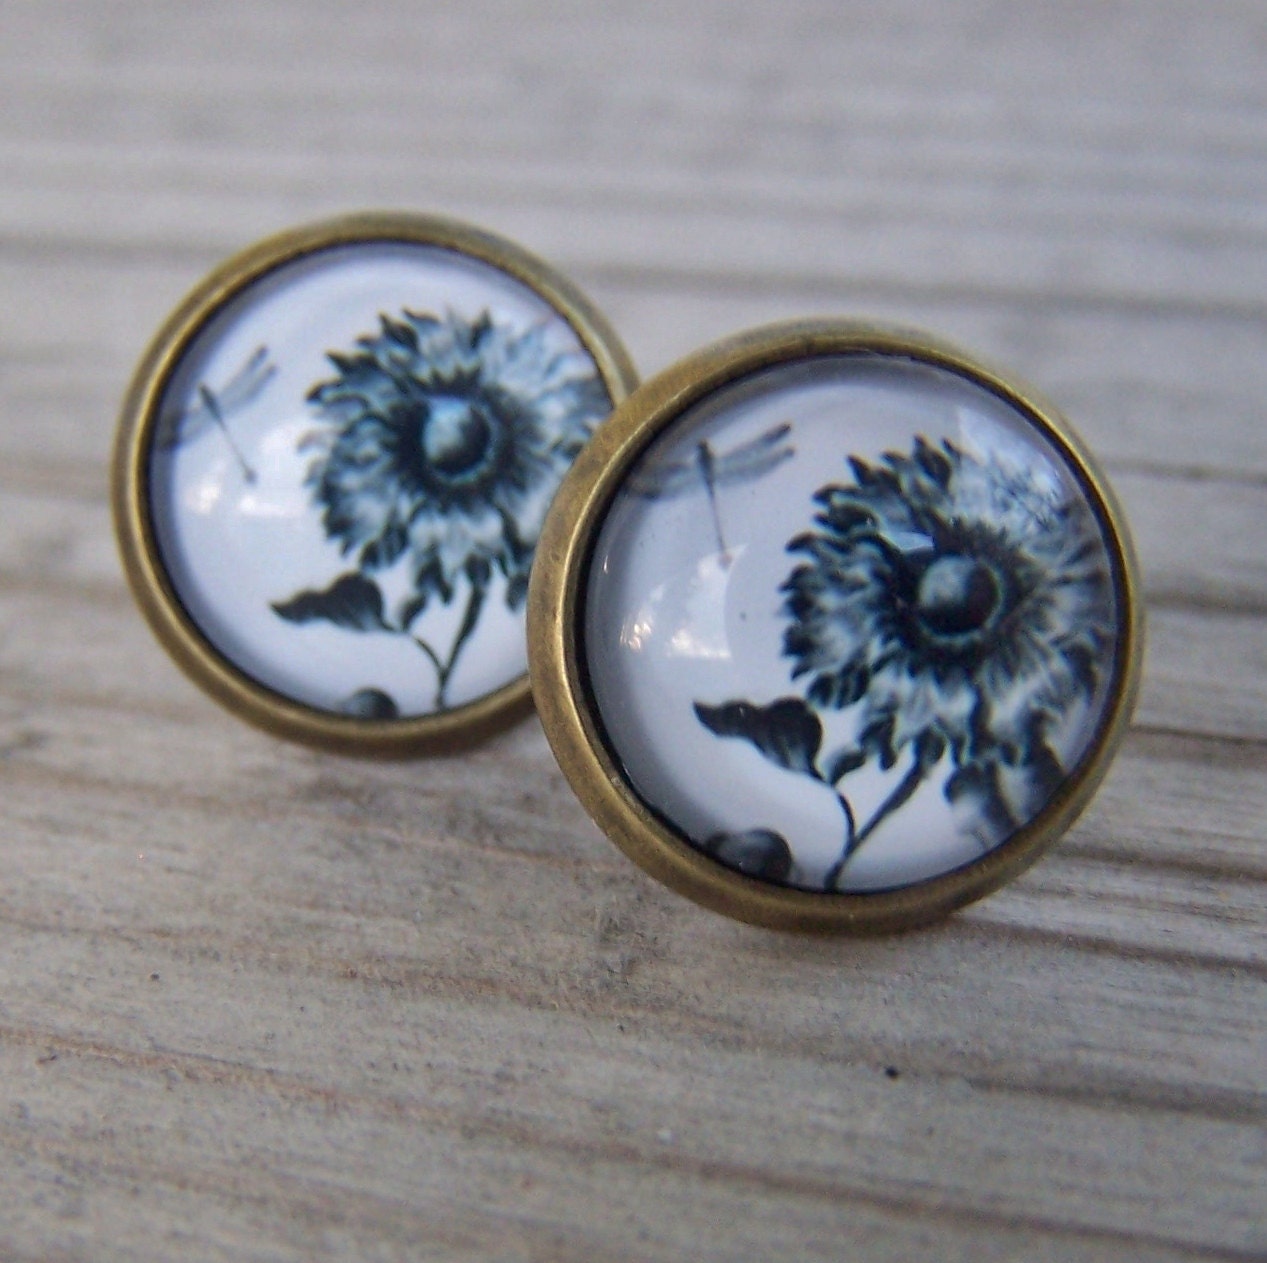 Glass Dome Earrings 12mm Black and White Flowers - gristmilldesigns